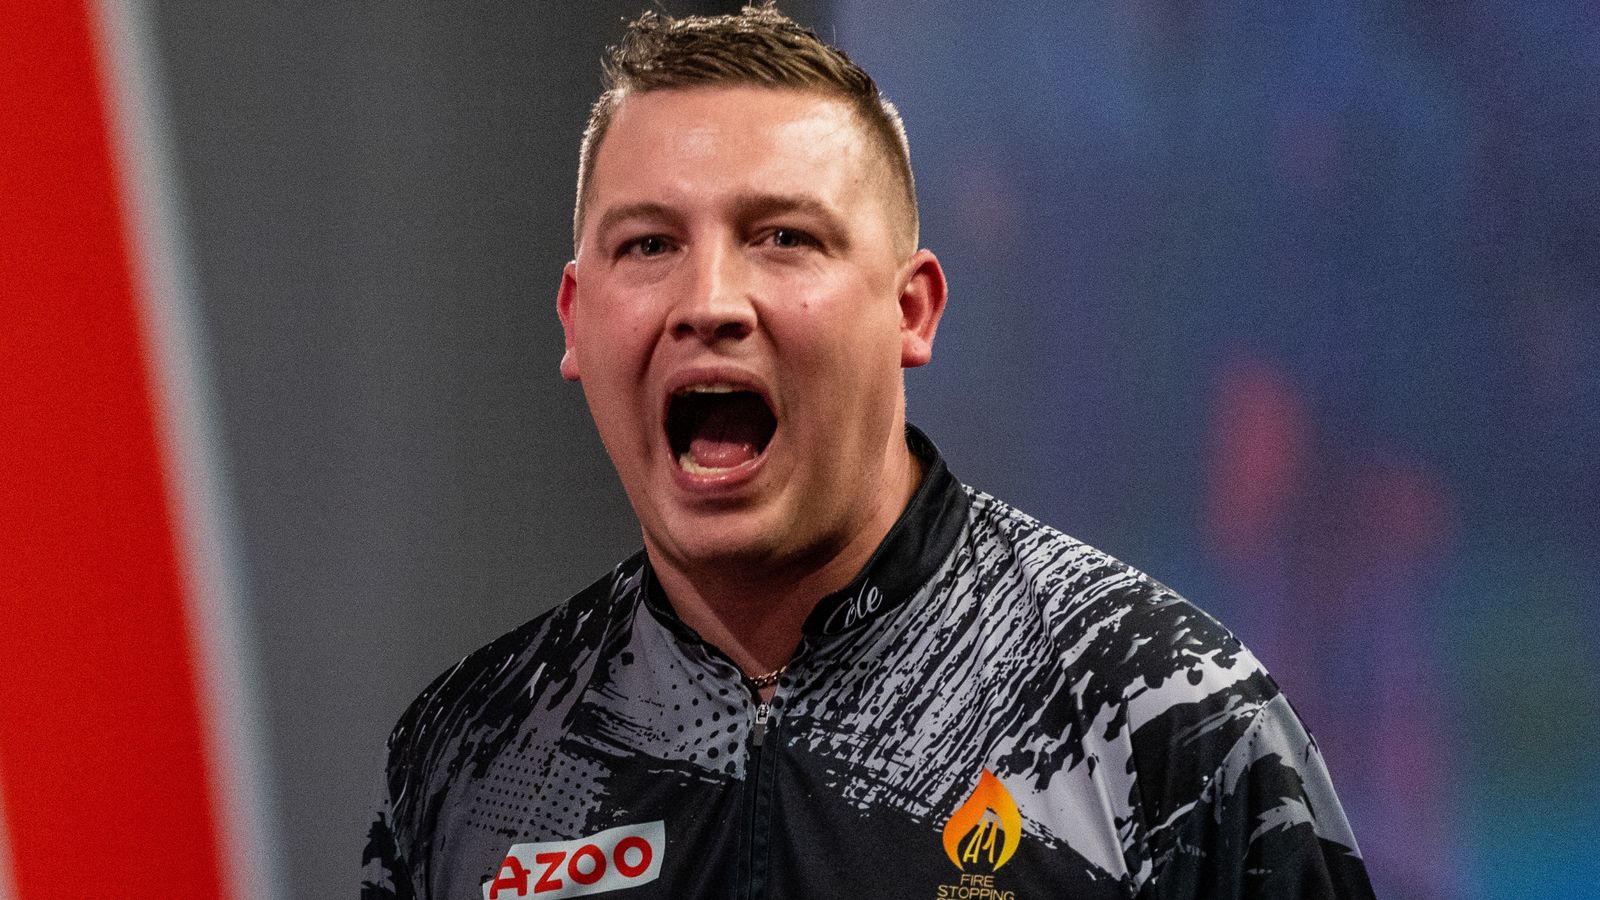 World Darts Championship: Chris Dobey says Gary Anderson annoyed him – ‘There was no way he was winning!’